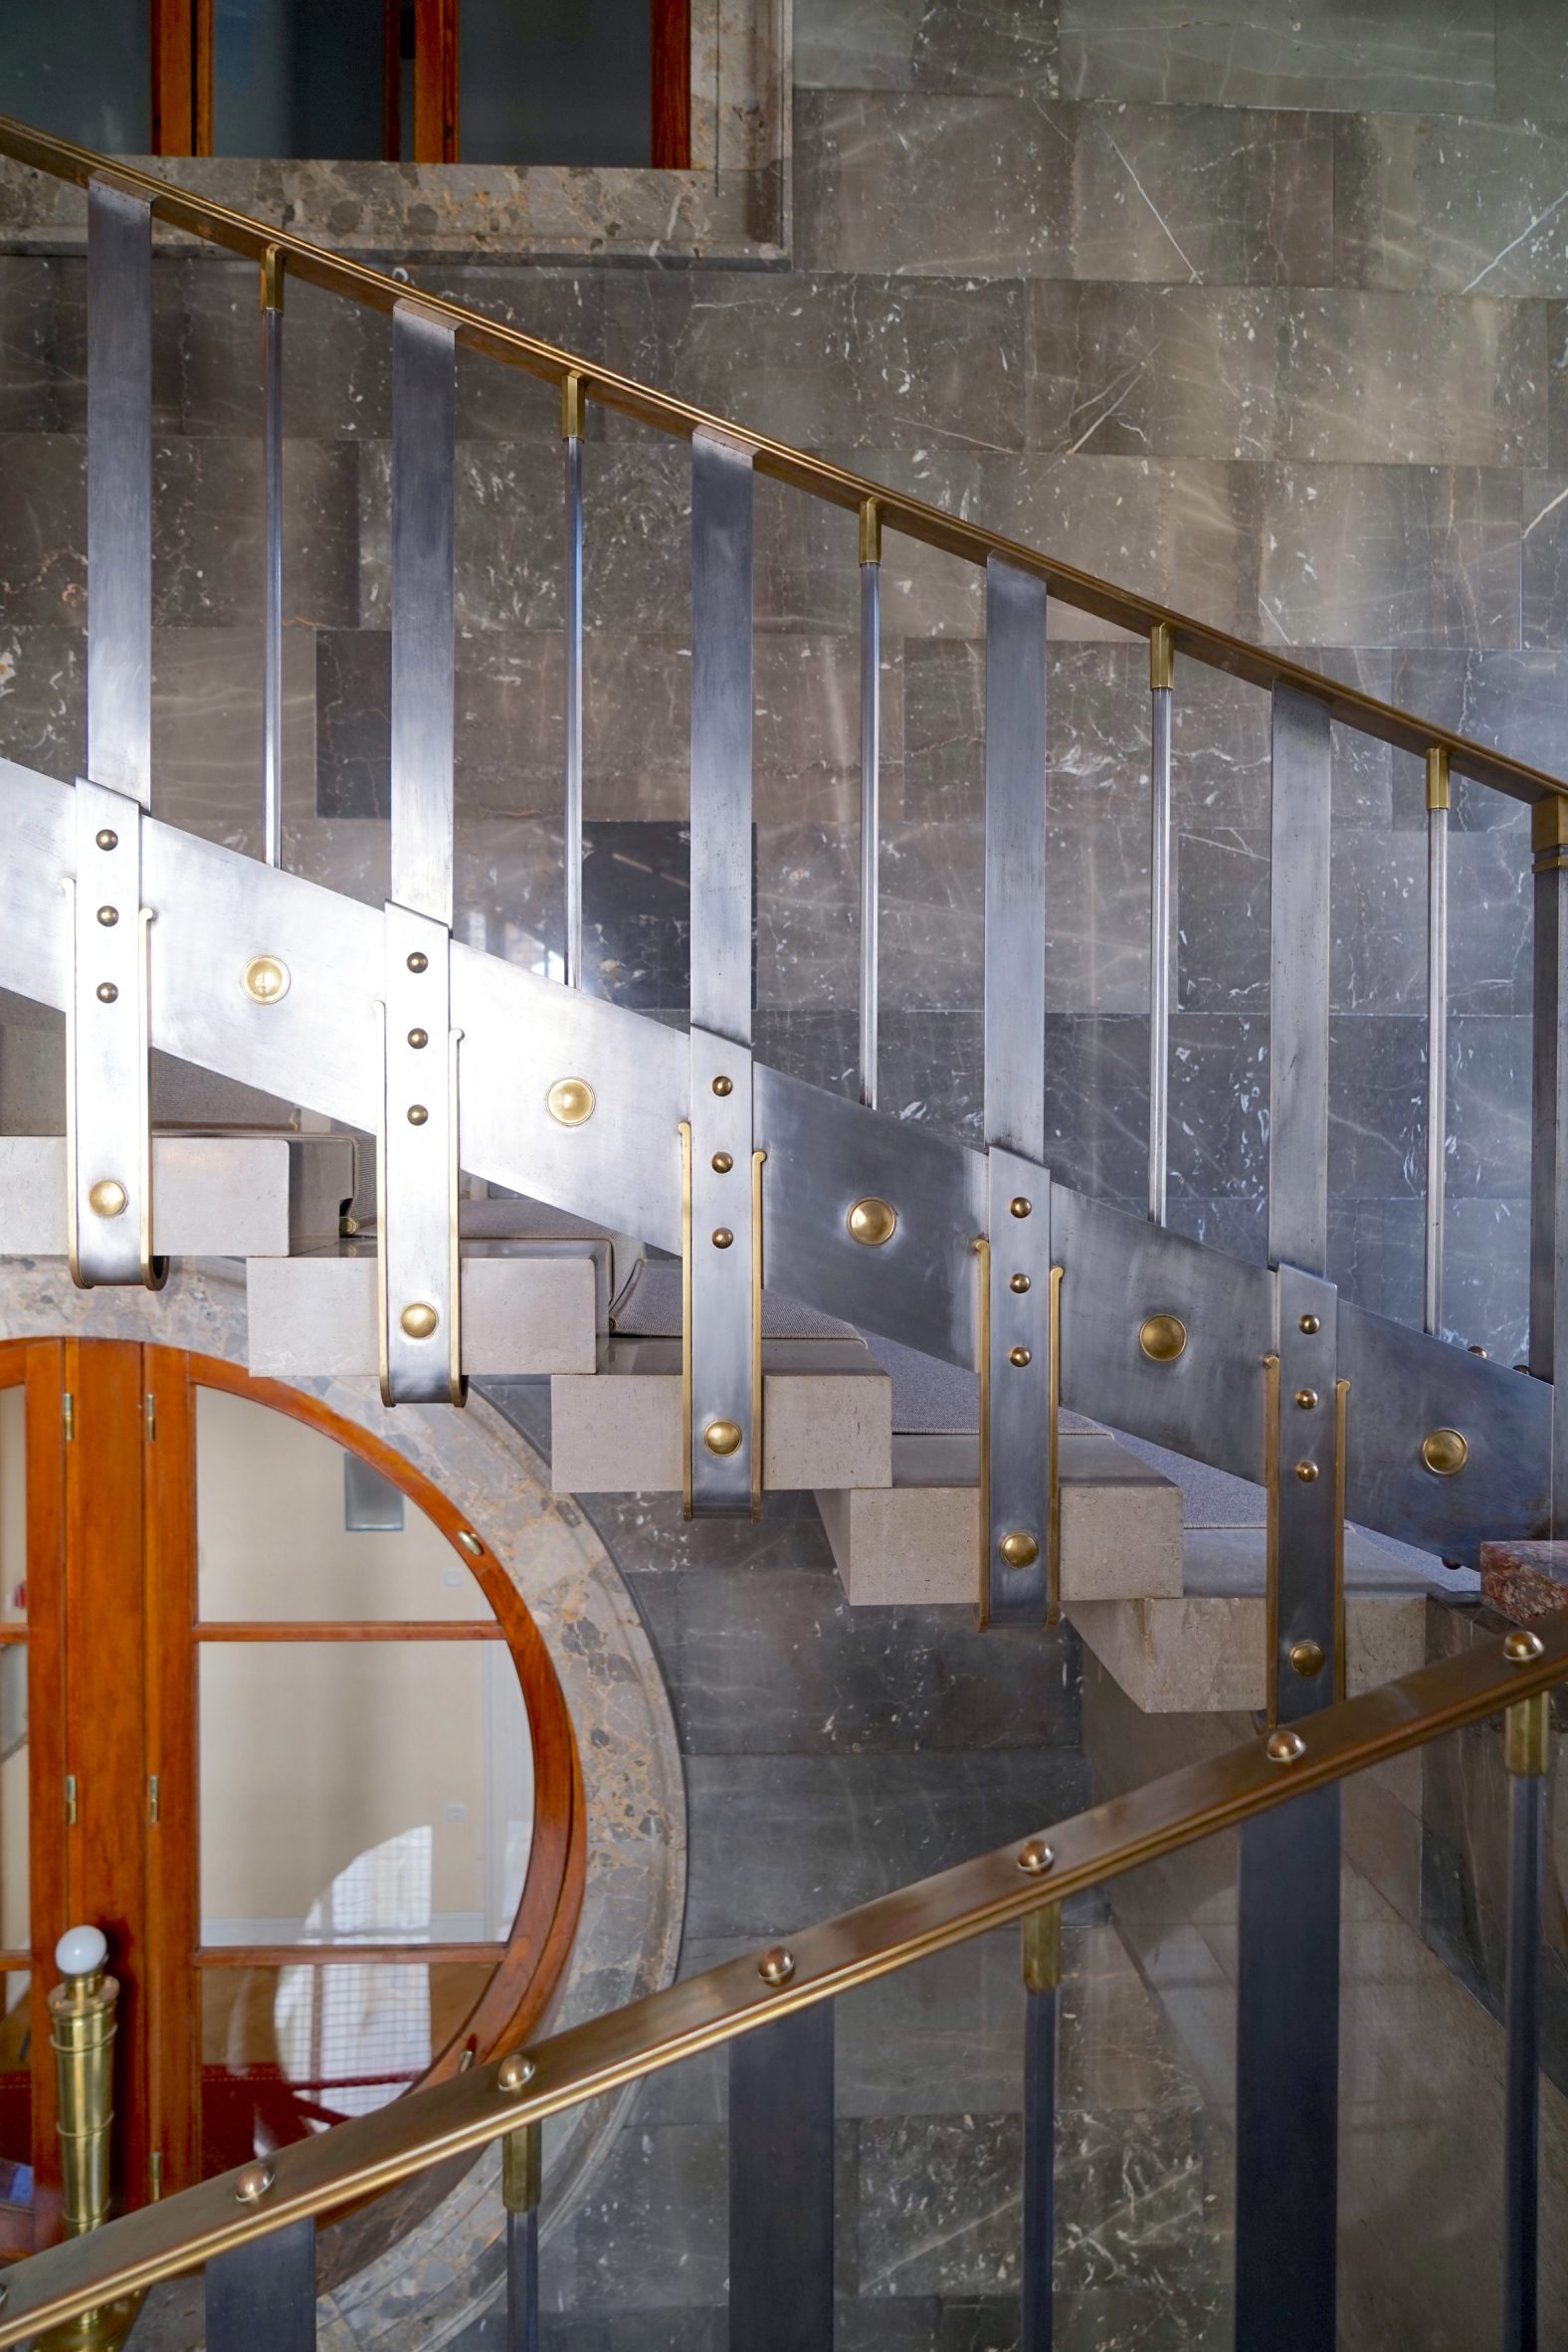 Metal staircase with metal handrail